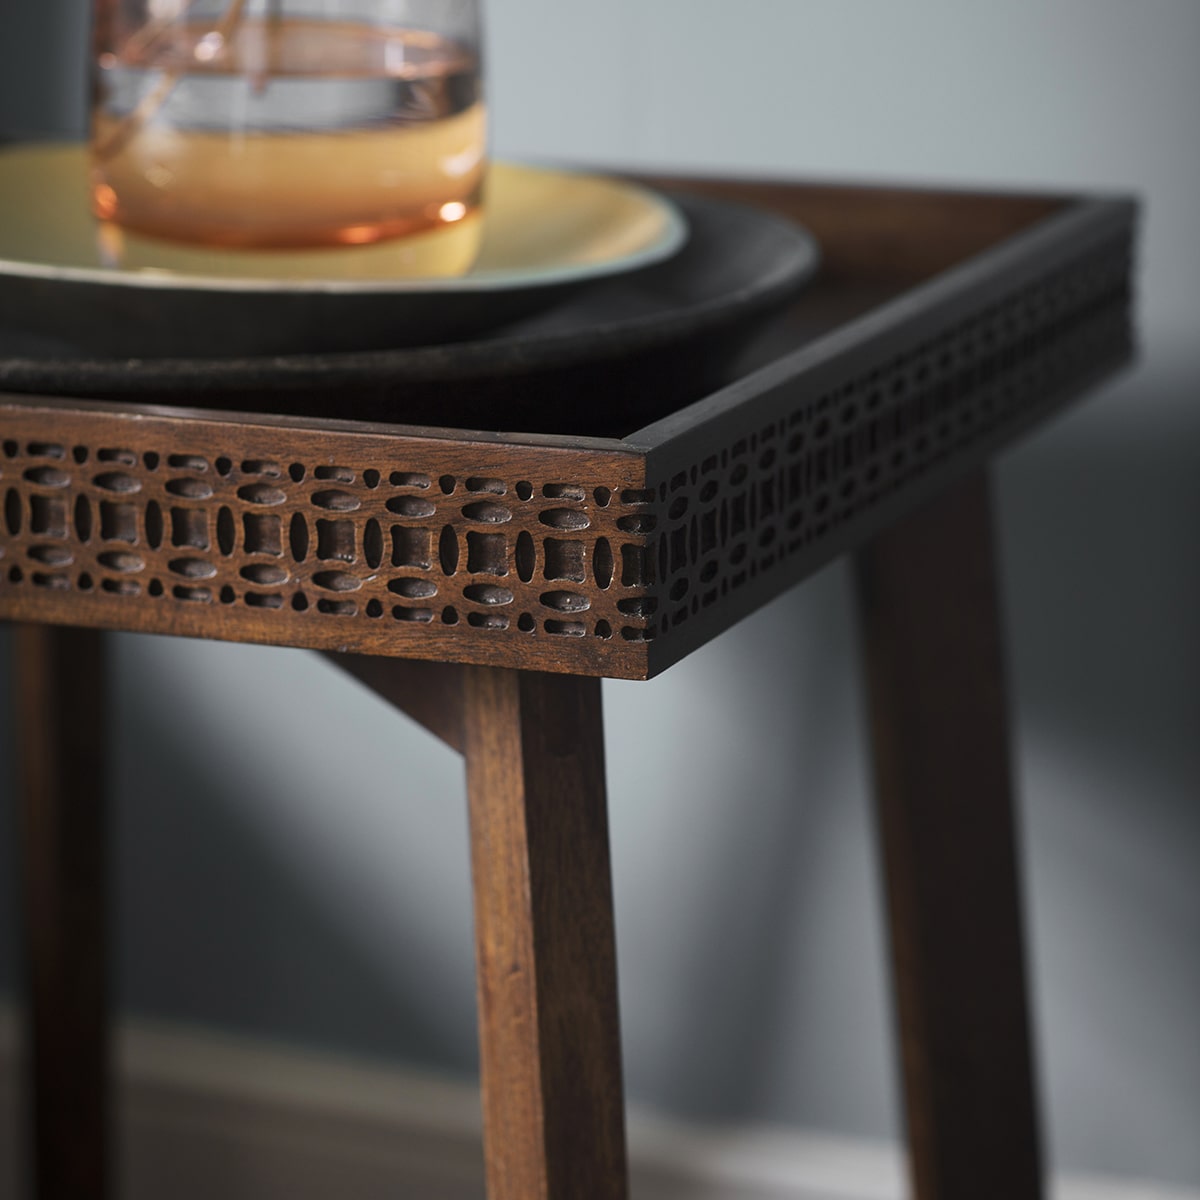 Close-up look at blind fretwork decorating the sides of the tray-like table top of the side table and legs